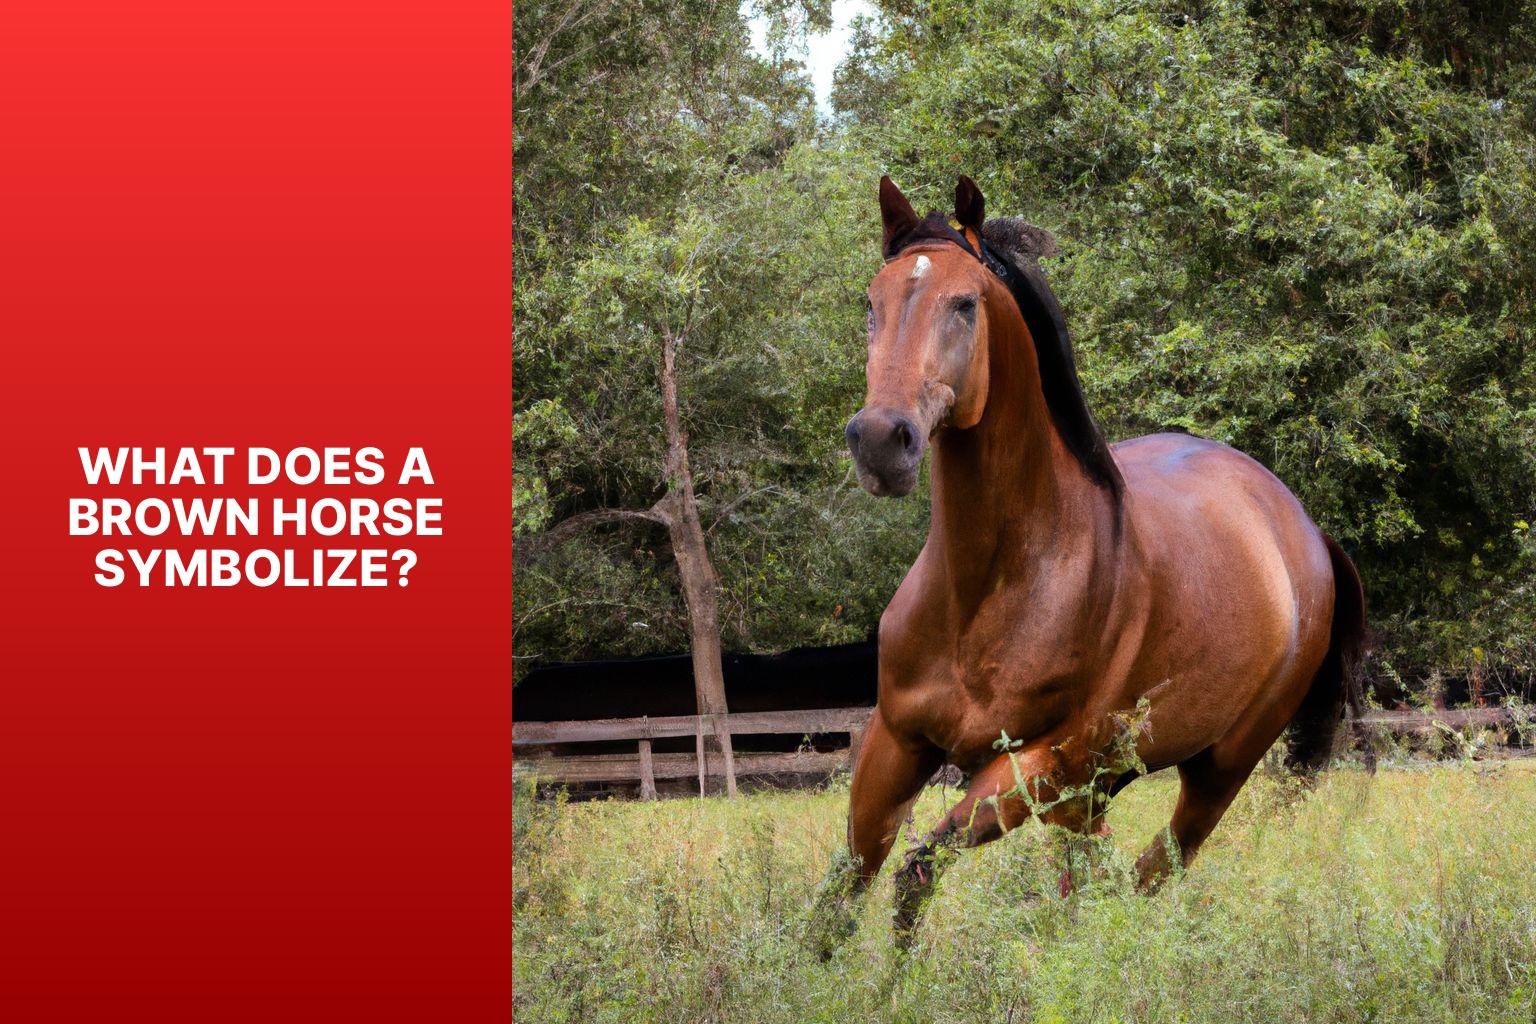 What Does a Brown Horse Symbolize? - brown horse dream meaning 